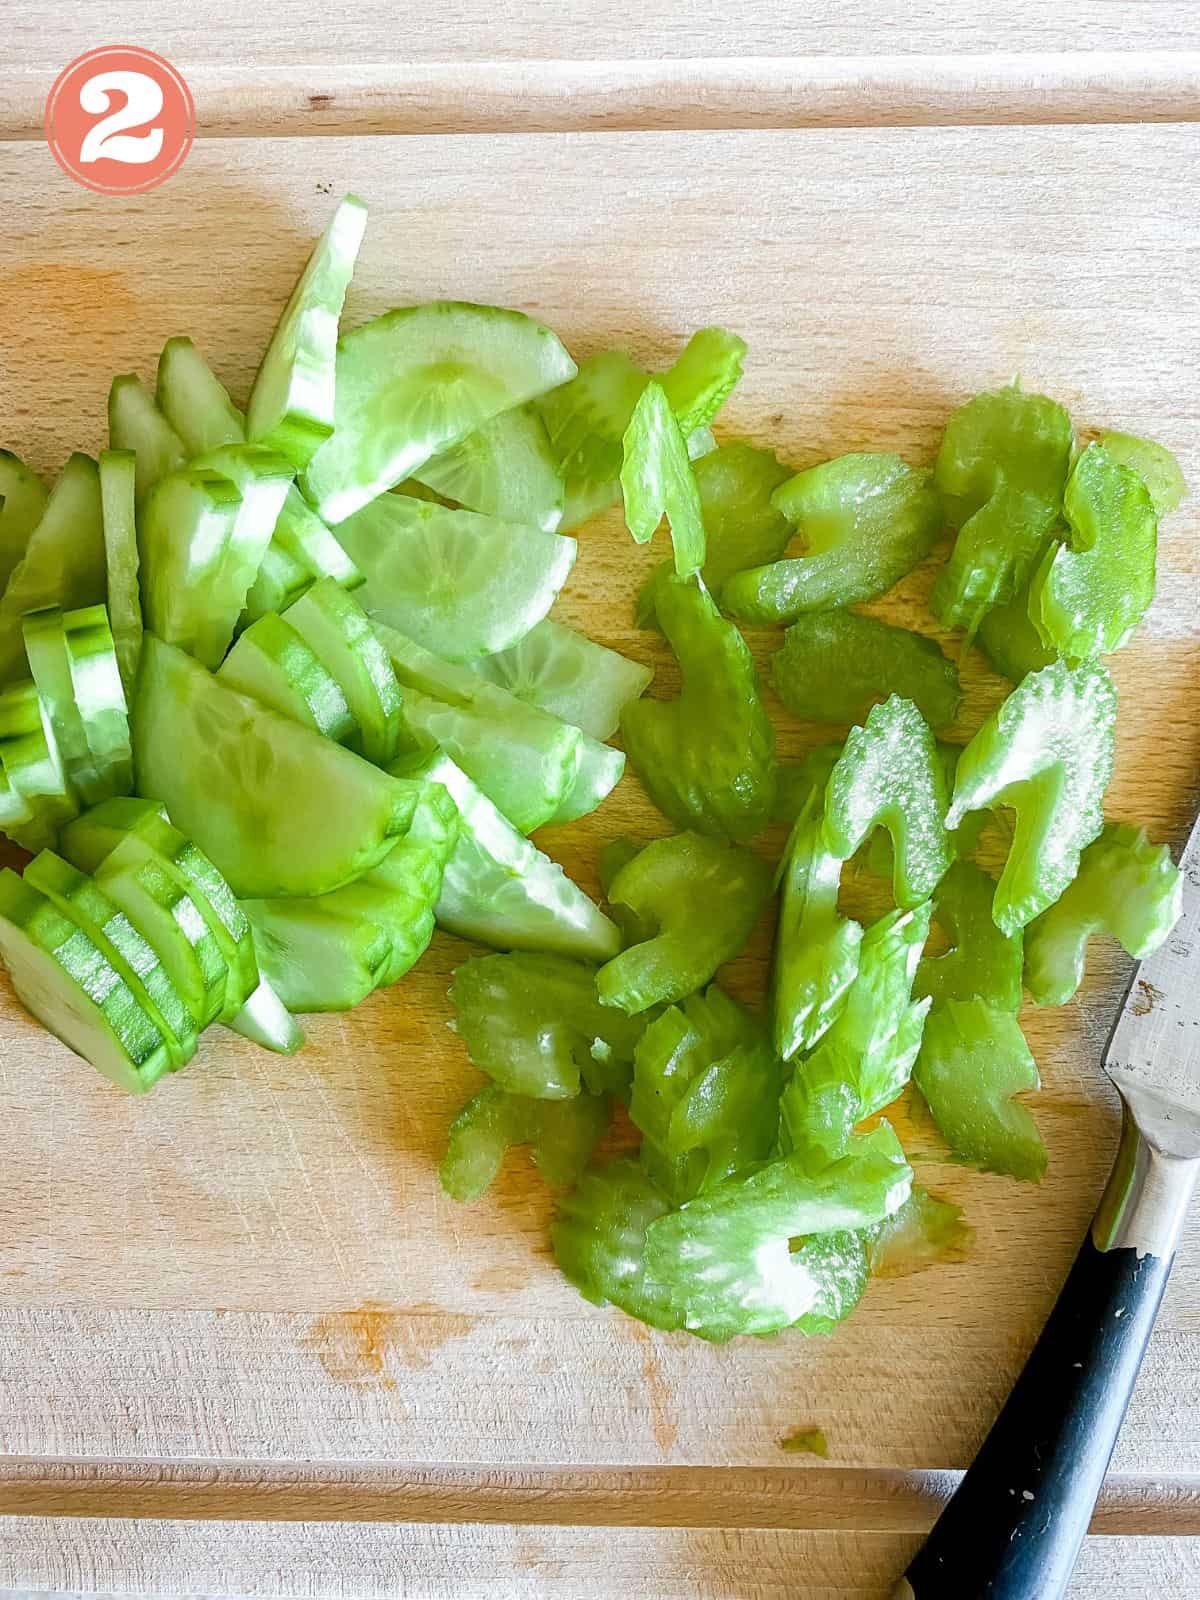 diced celery and cucumber on a wooden board.